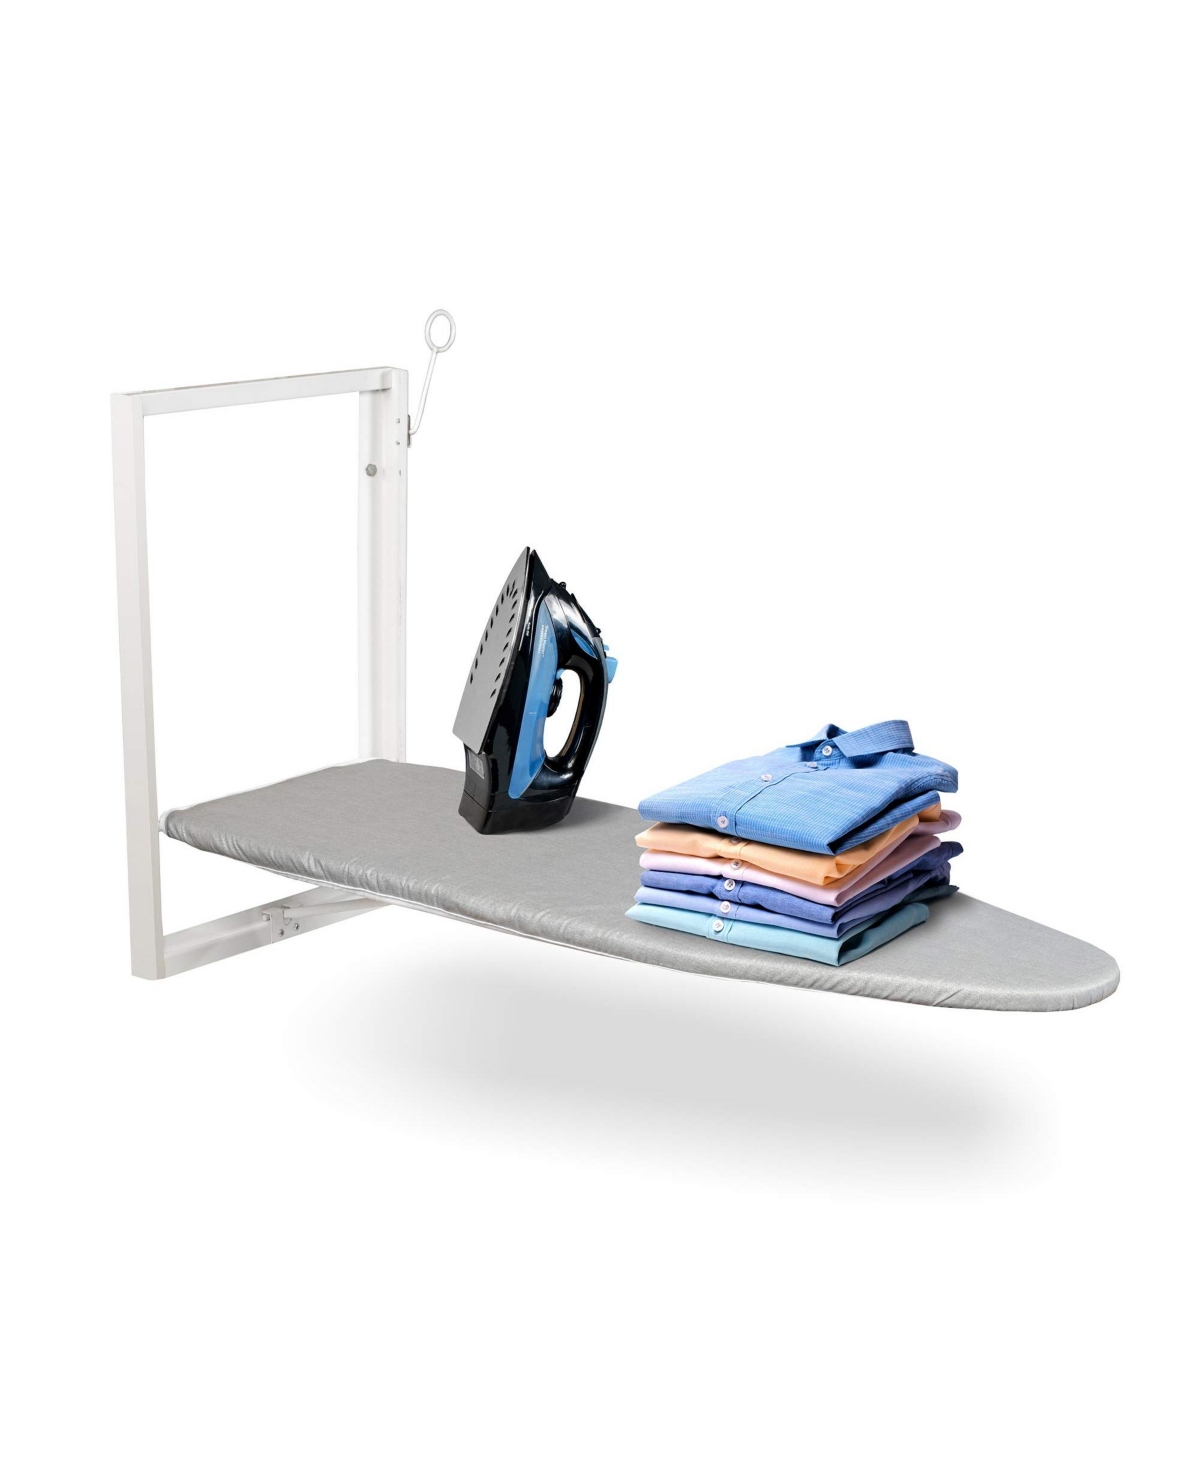 Foldable Ironing Board, Wall Mount Iron Board w/Removable Cover - Blue/white